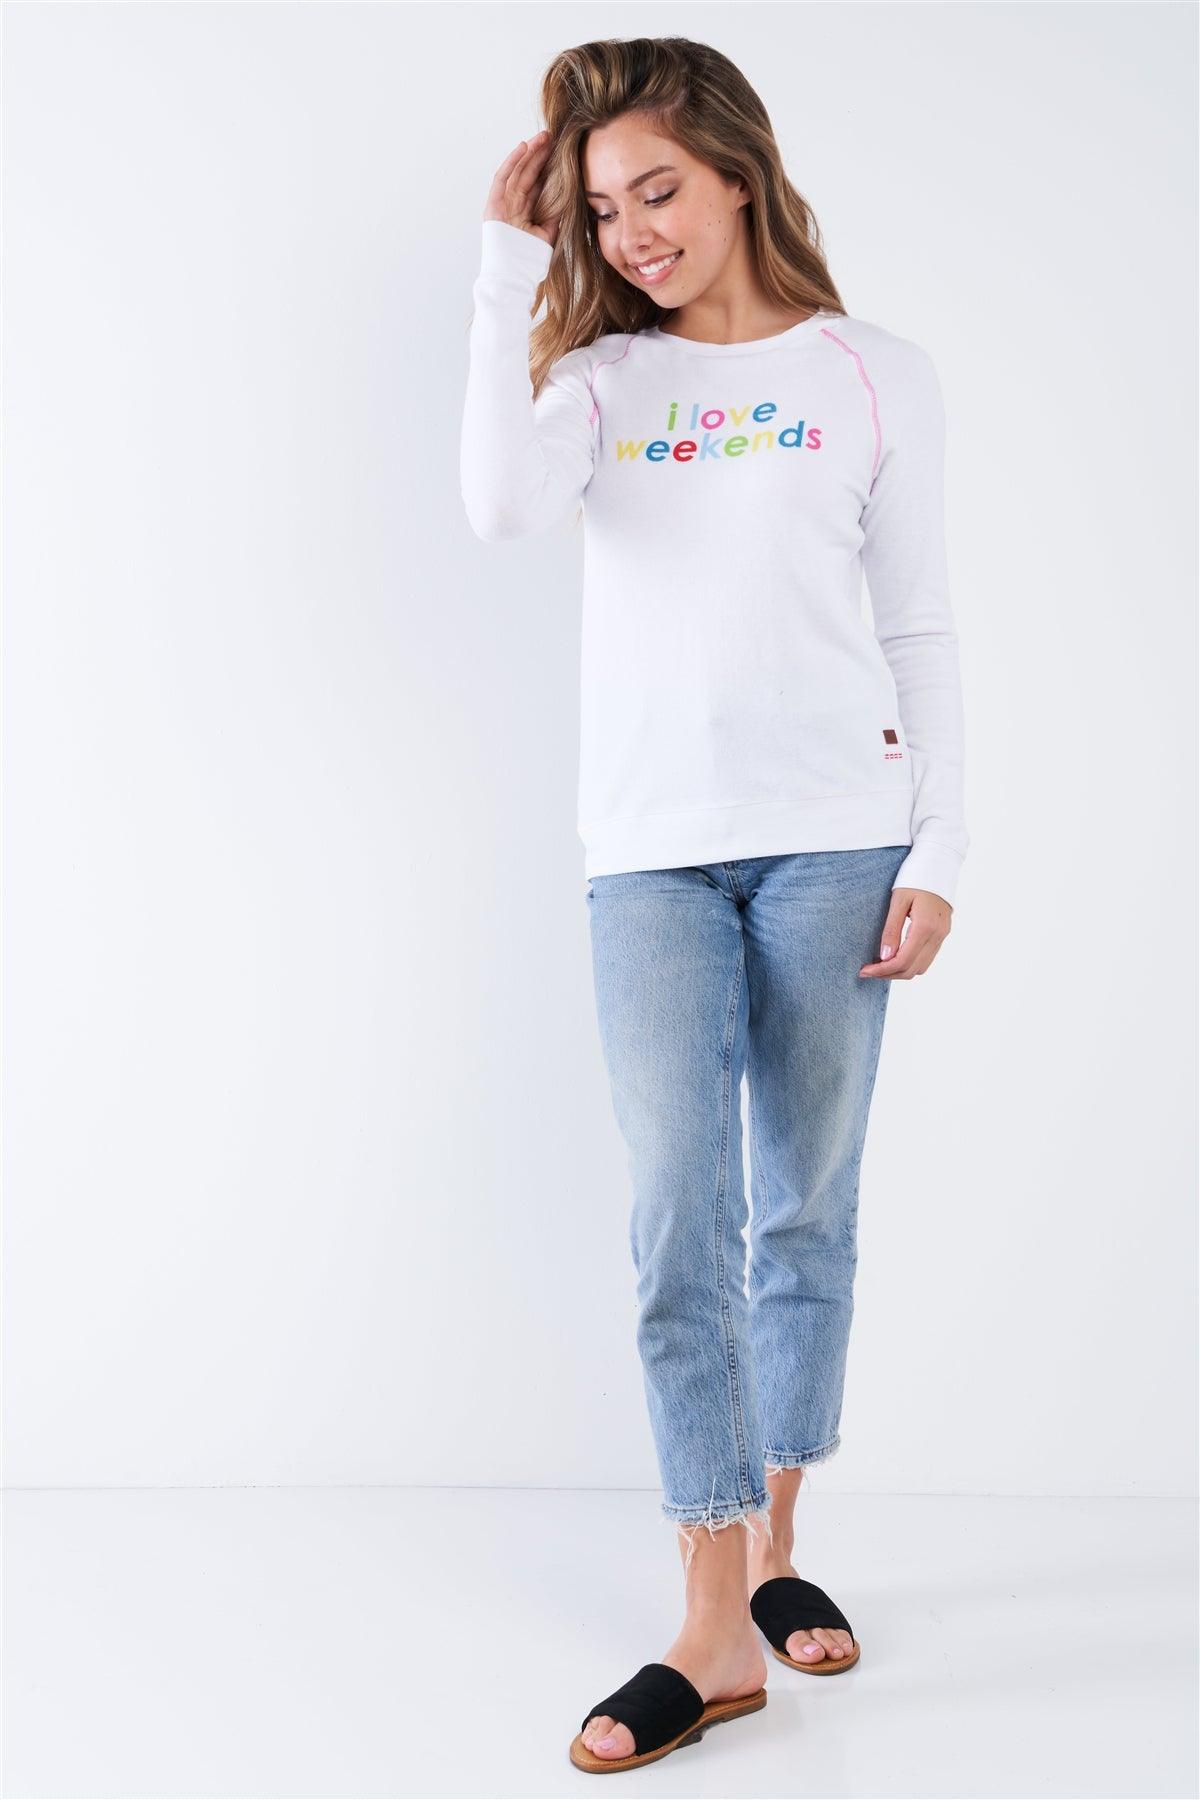 White Long Sleeve Comfy Crew Neck "I Love Weekends" Top